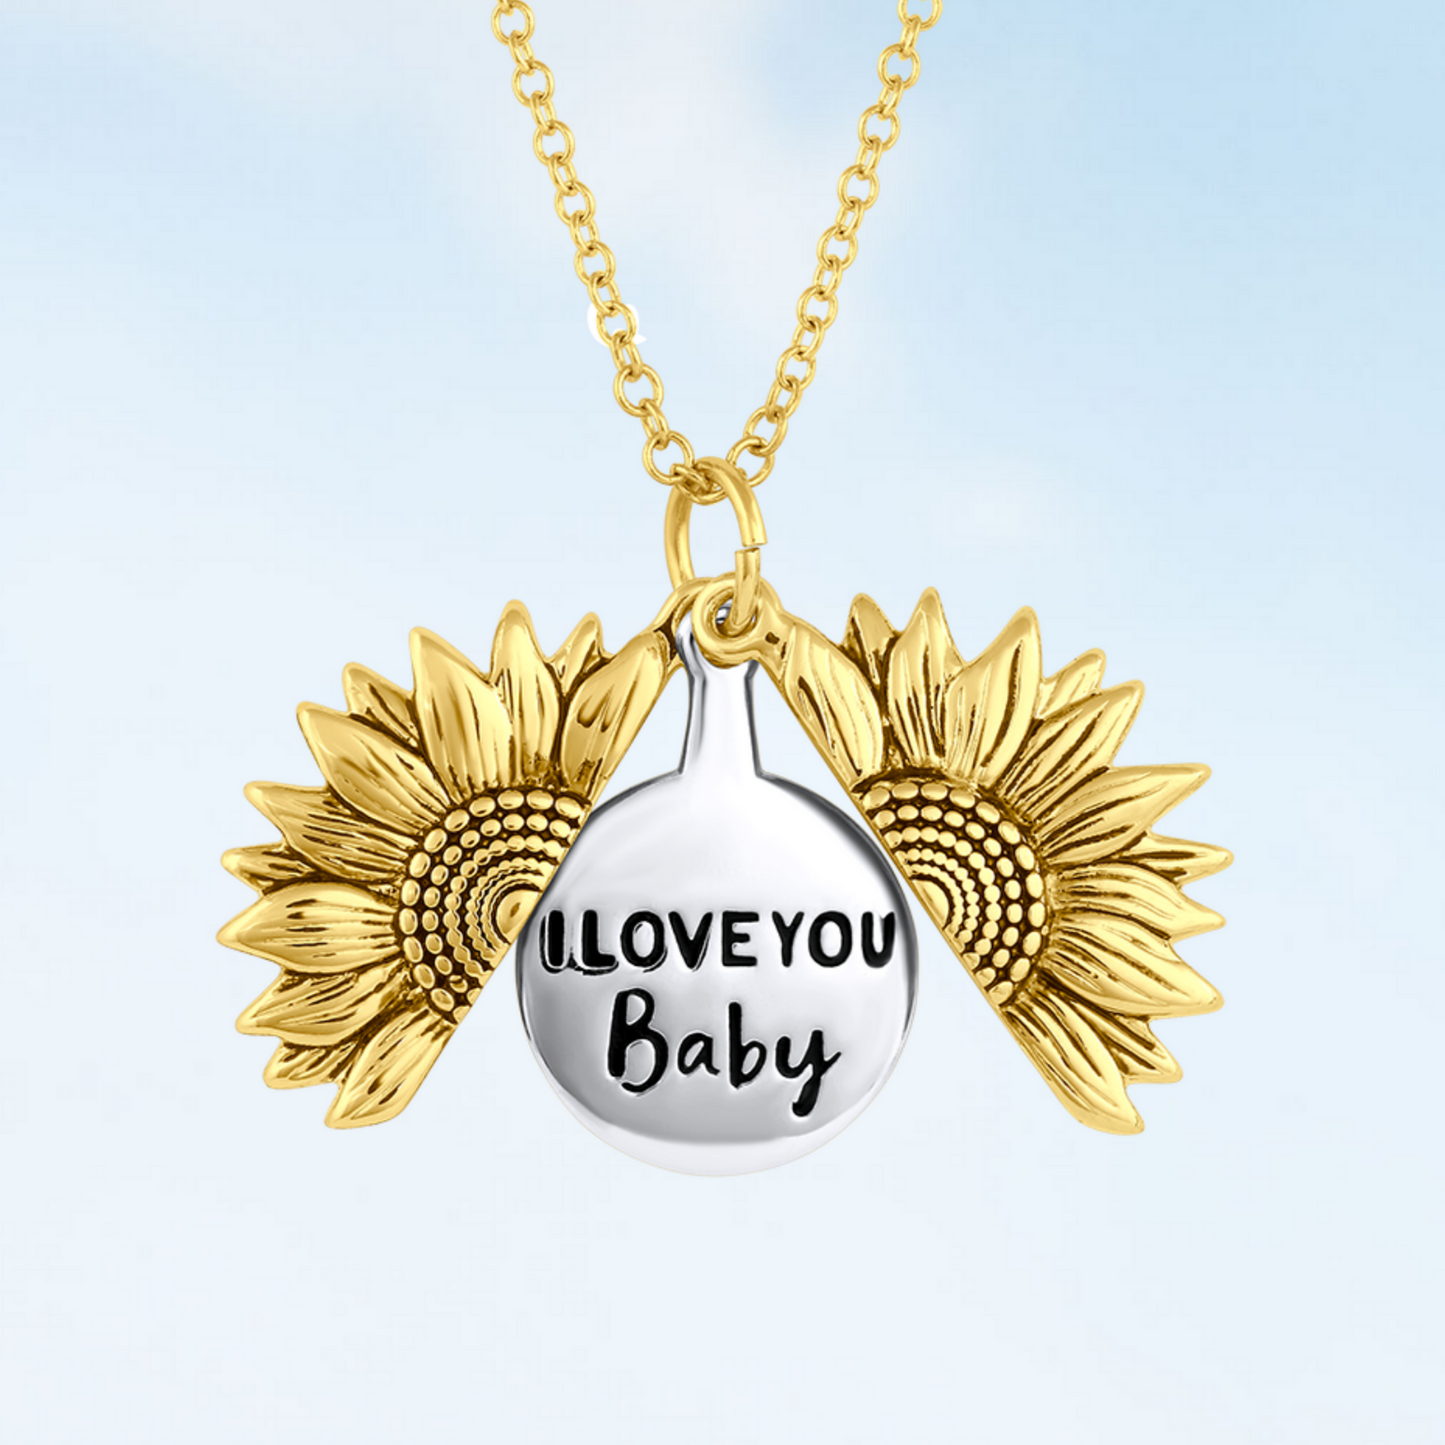 "I love You Baby" Necklace